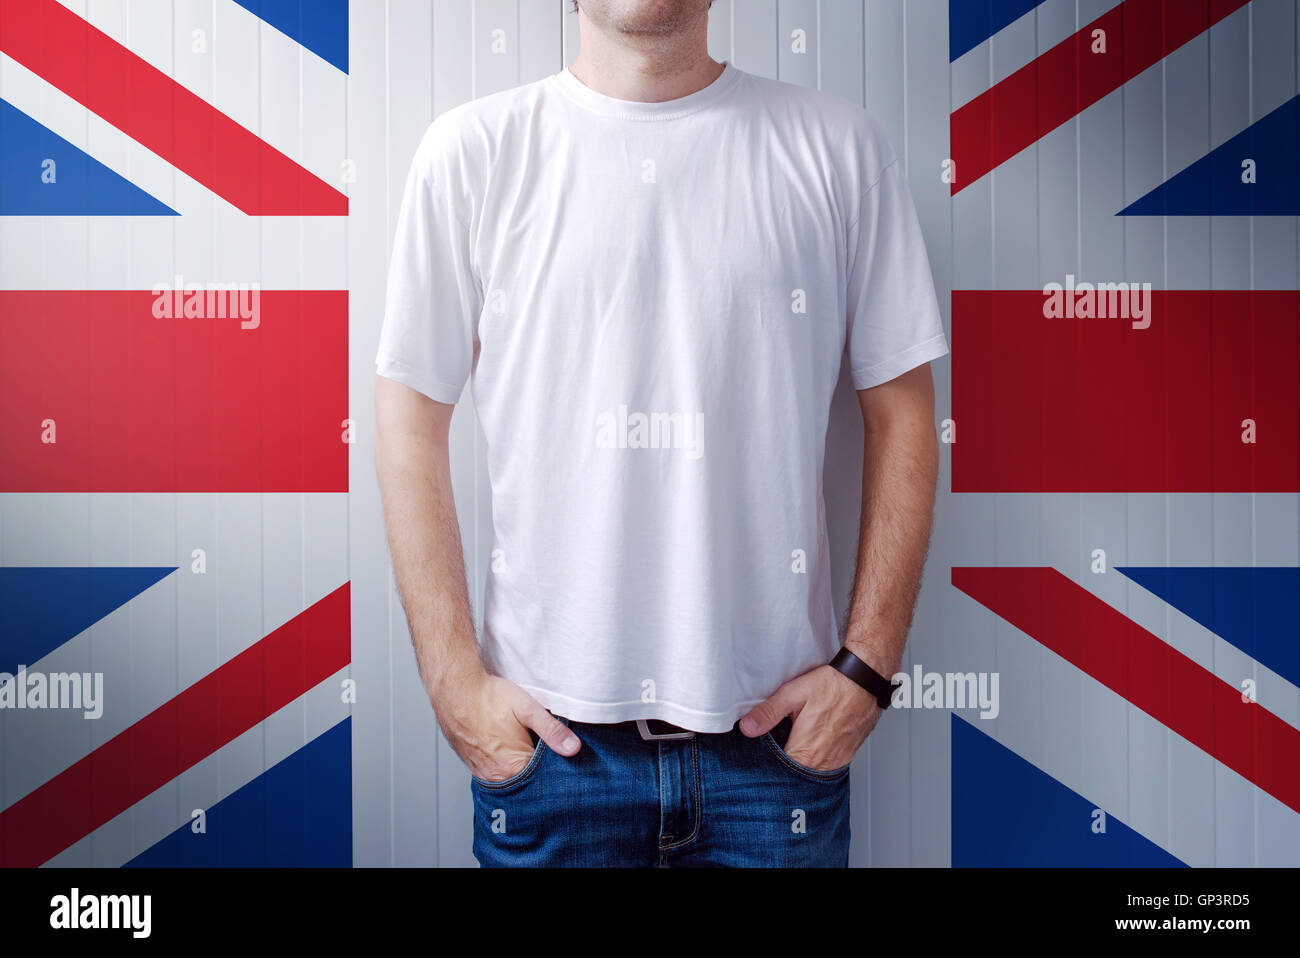 Man standing in front of United Kingdom flag wall, adult male person supporting Great Britain Stock Photo